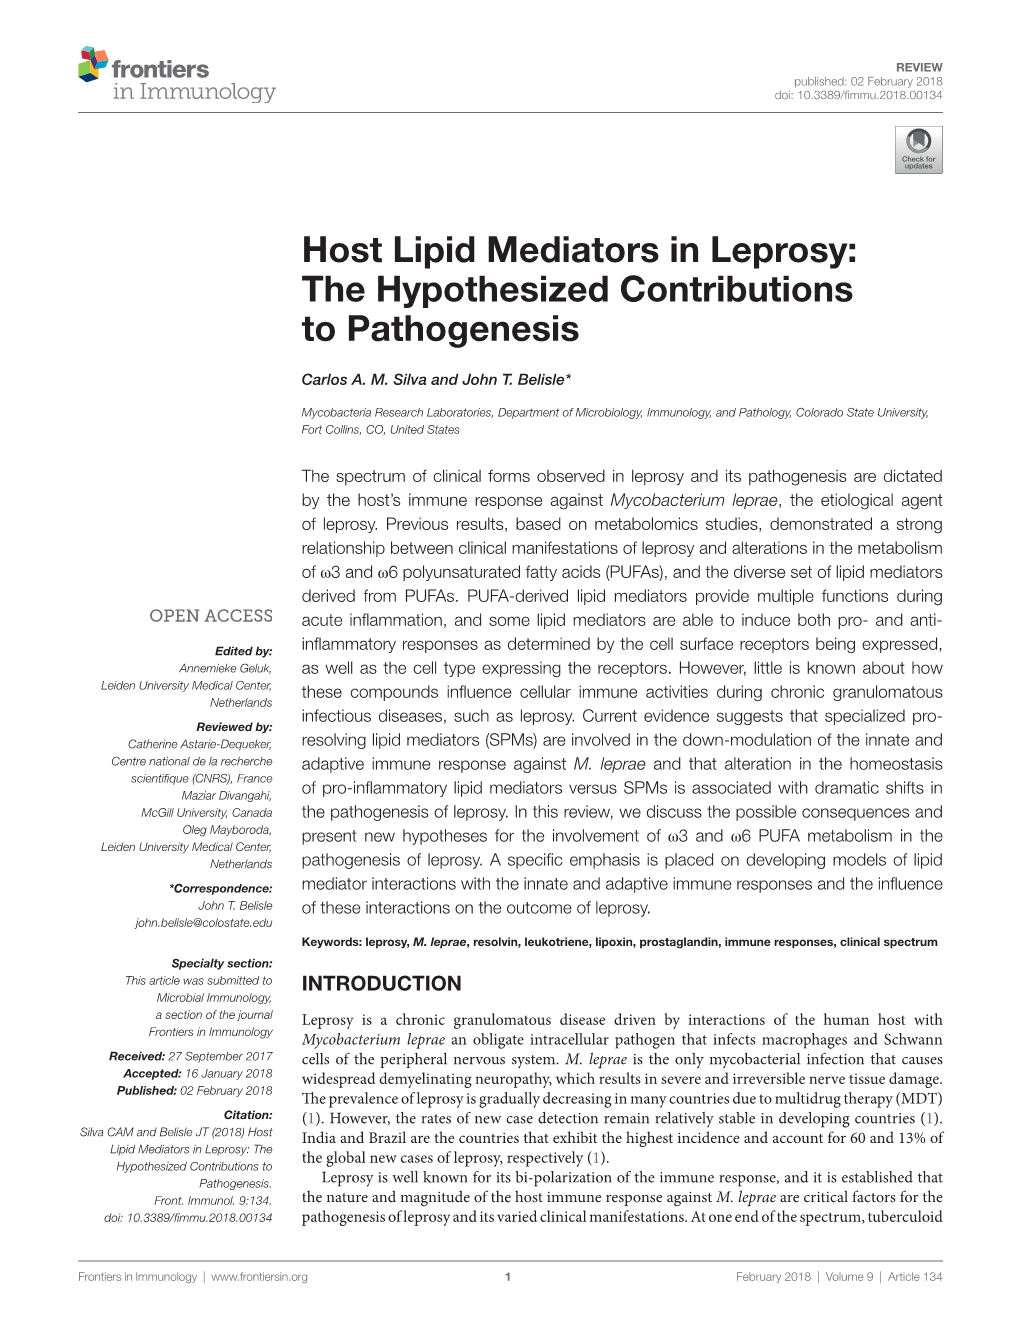 Host Lipid Mediators in Leprosy: the Hypothesized Contributions to Pathogenesis